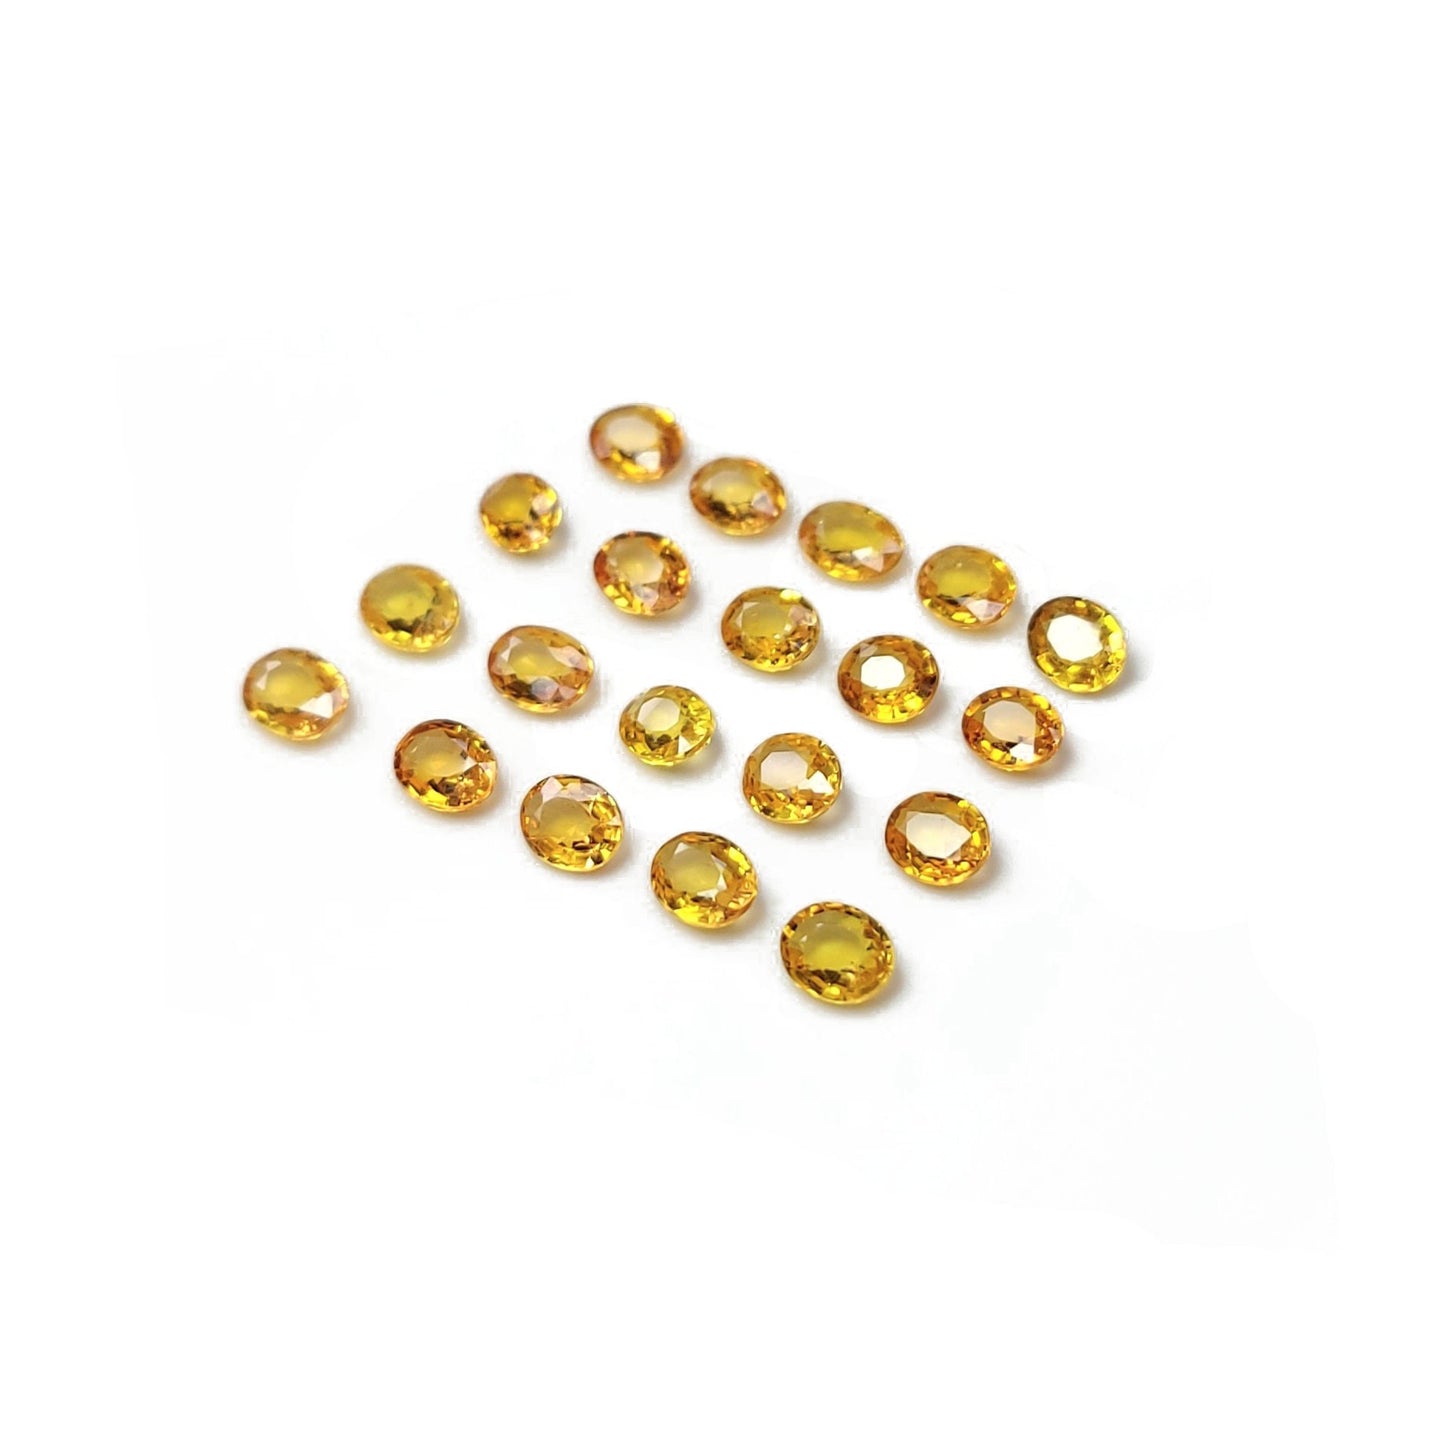 100% Natural Yellow Sapphire Heated Calibrated 5x4mm Ovals